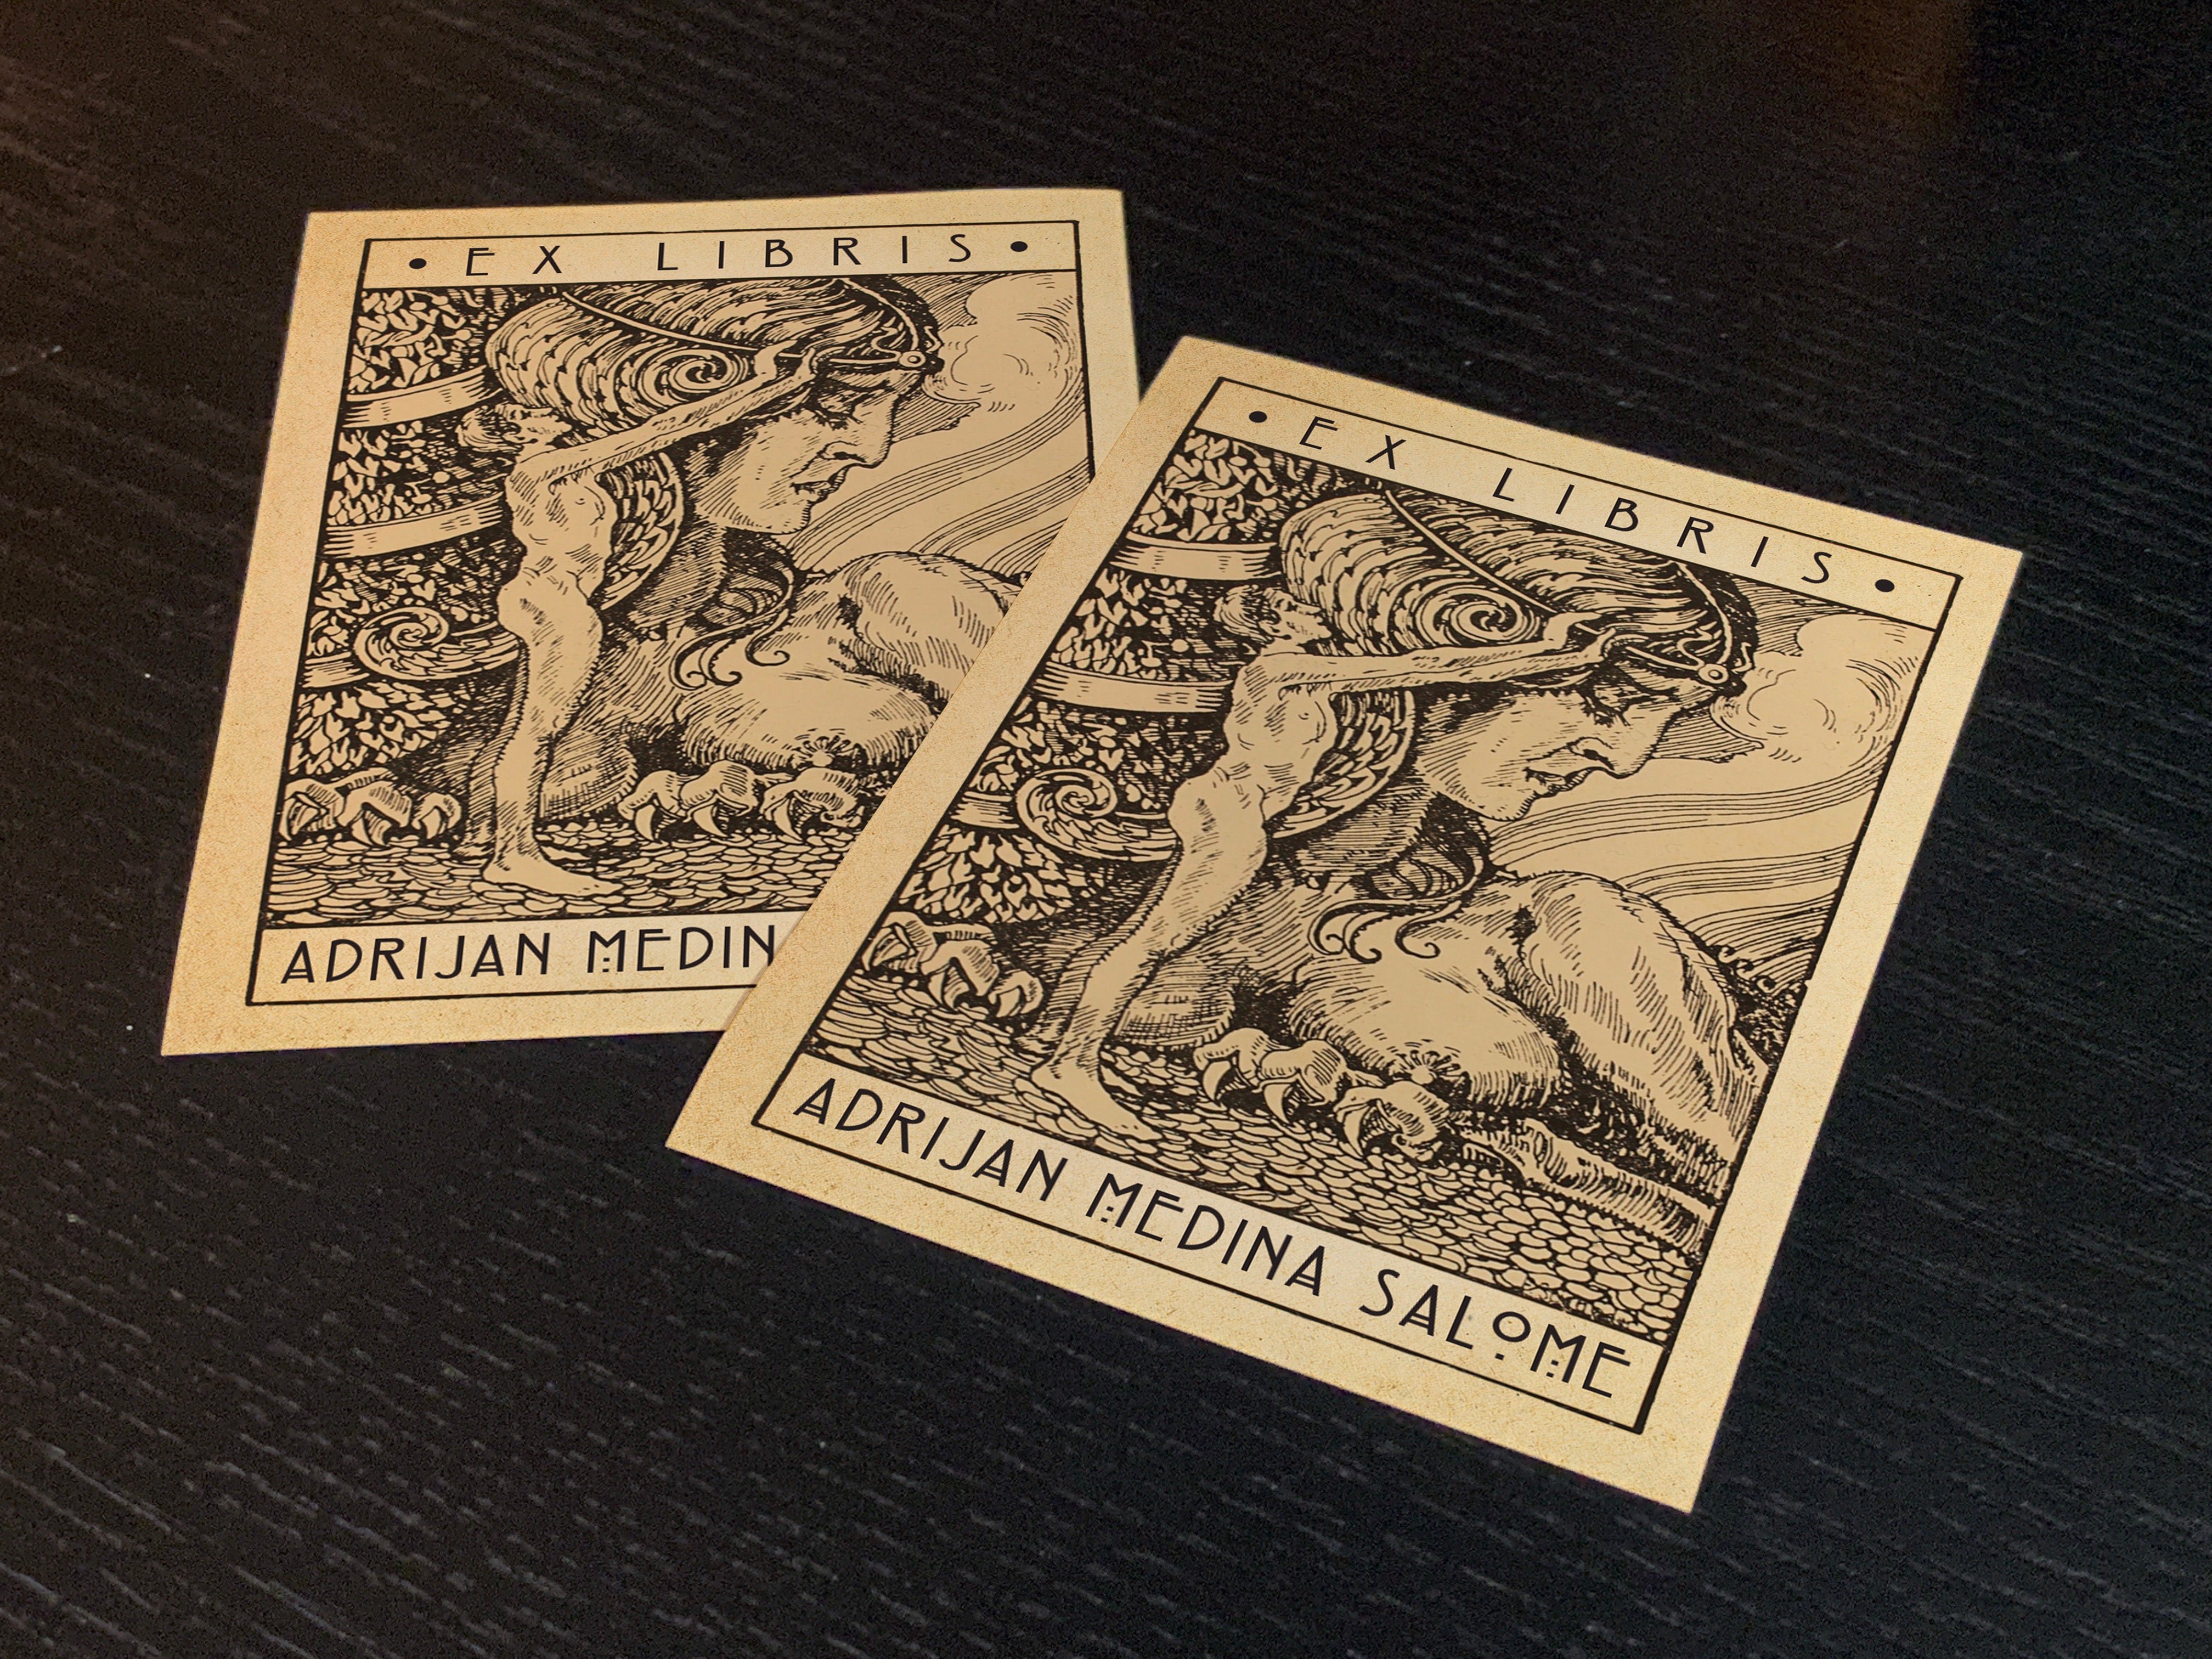 The Sphinx, Personalized Erotic Ex-Libris Bookplates, Crafted on Traditional Gummed Paper, 3in x 4in, Set of 30